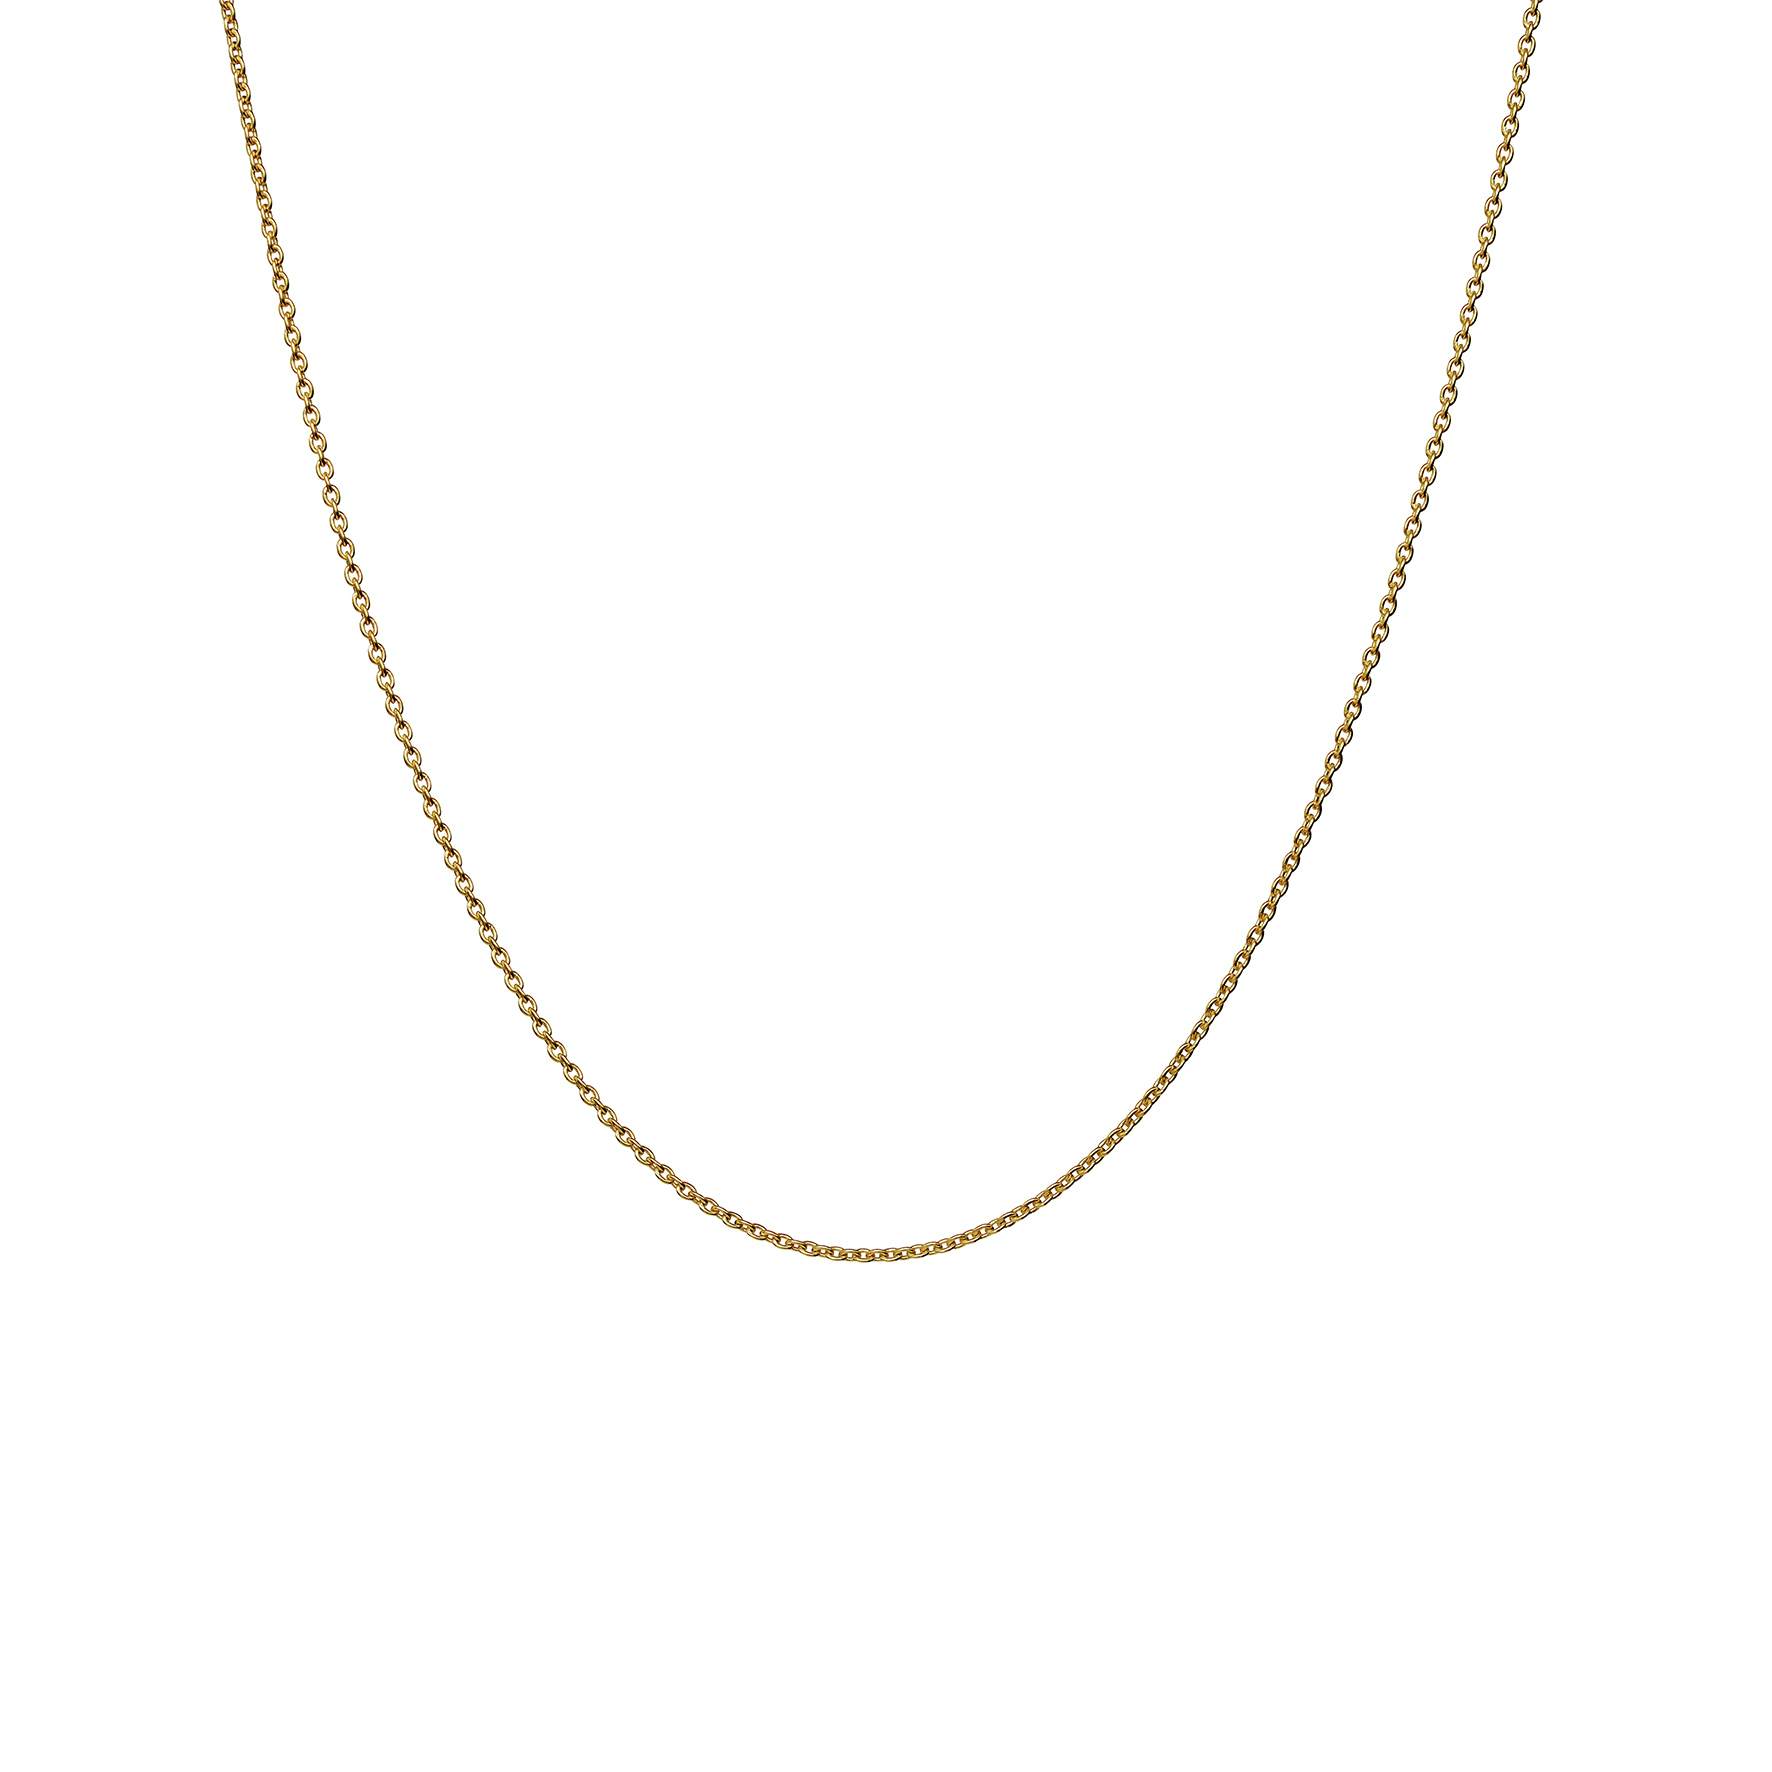 Charlie Medium Necklace from Maanesten in Goldplated-Silver Sterling 925